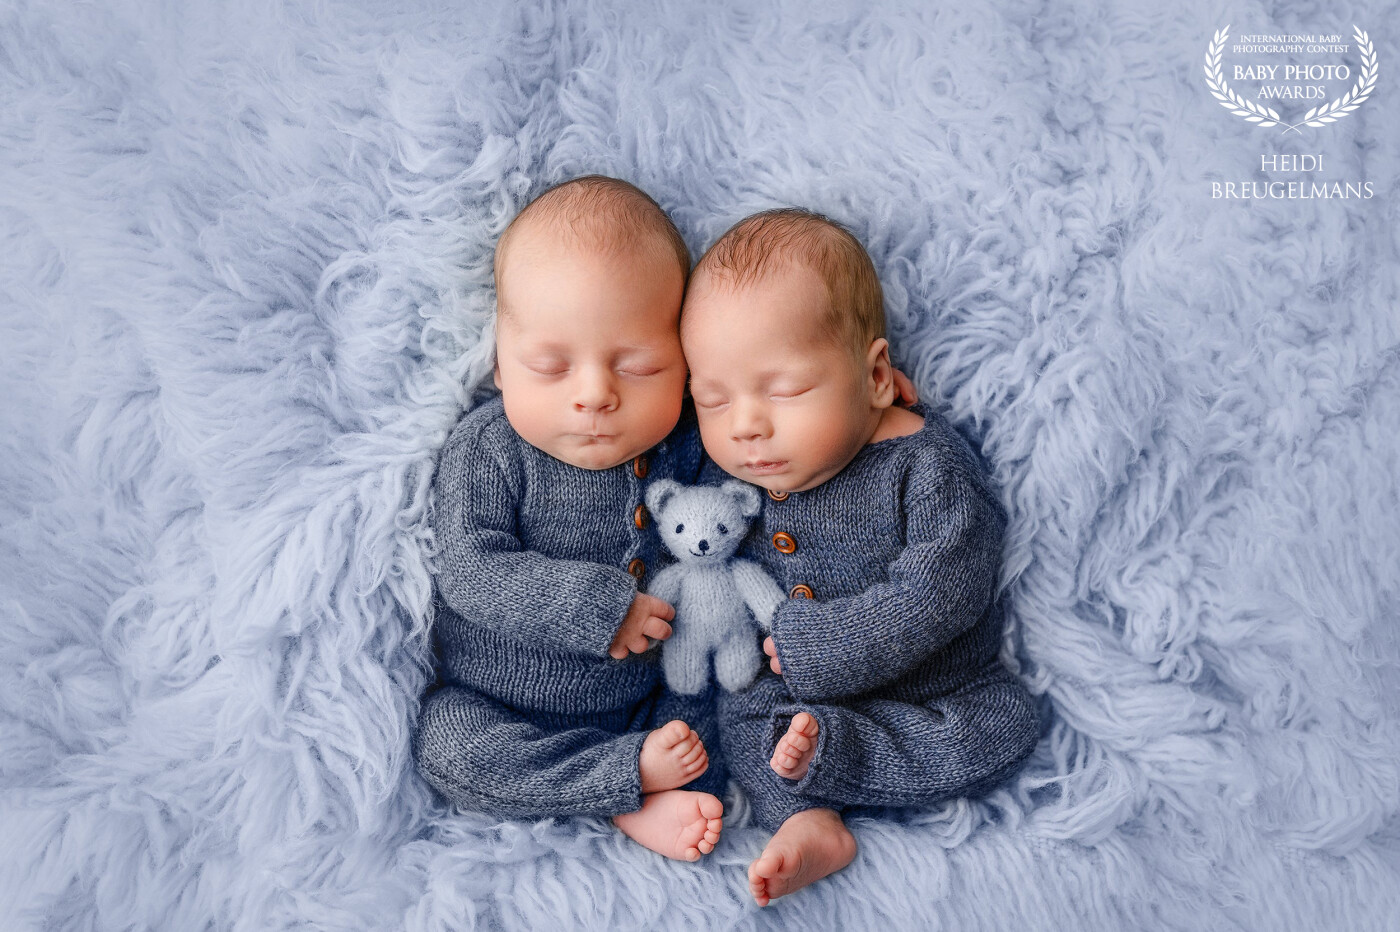 I had the privilege of photographing a beautiful twin duo recently. Originally expected to arrive in February, these two boys surprised everyone by coming a few weeks early, adding to the excitement.<br />
<br />
During their newborn session, they were absolutely amazing. Their adorable presence filled the room, and I captured a stunning series of photos, immortalizing their tender and pure moments.<br />
<br />
It was an honor to capture these precious moments. Each photograph from their newborn session is a treasured reminder of the joy this twin duo brings. I hope these images will always remind their parents of the invaluable connection their boys share.